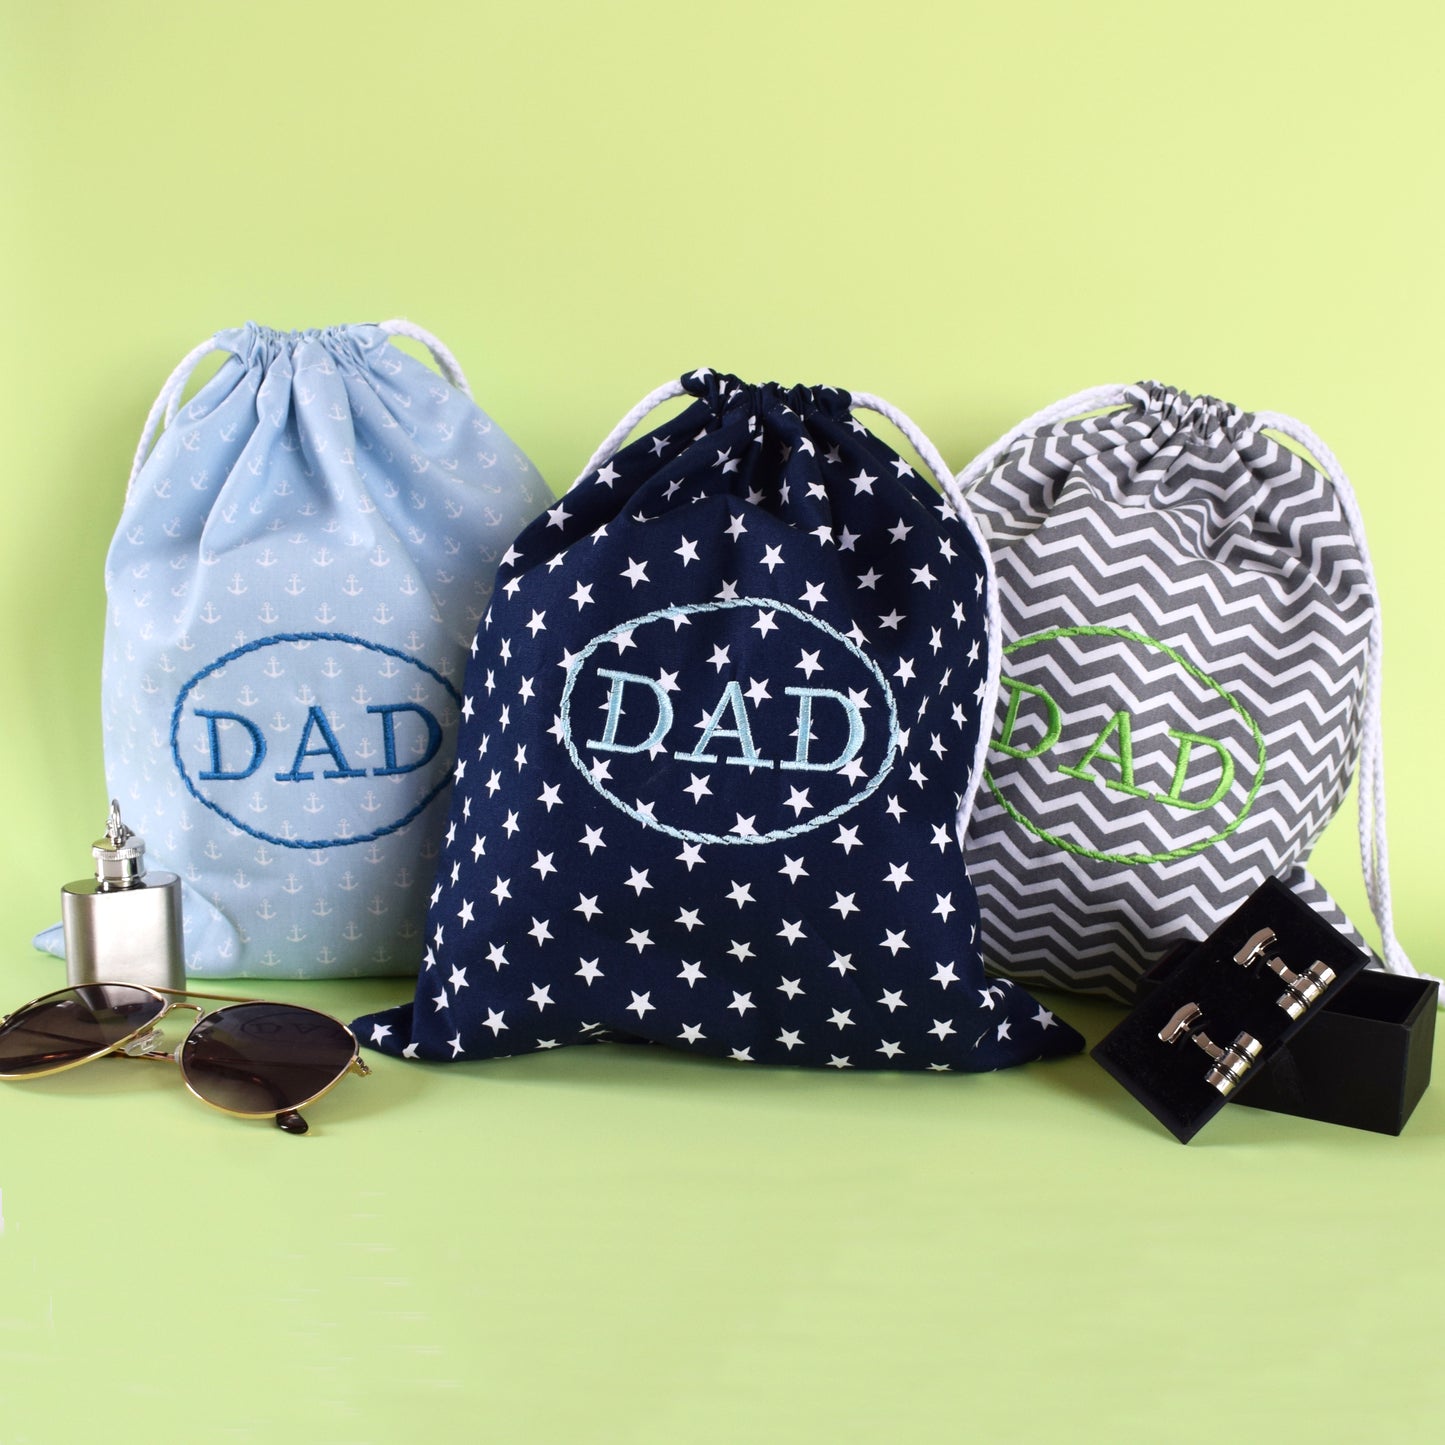 Father's Day Gift Bag